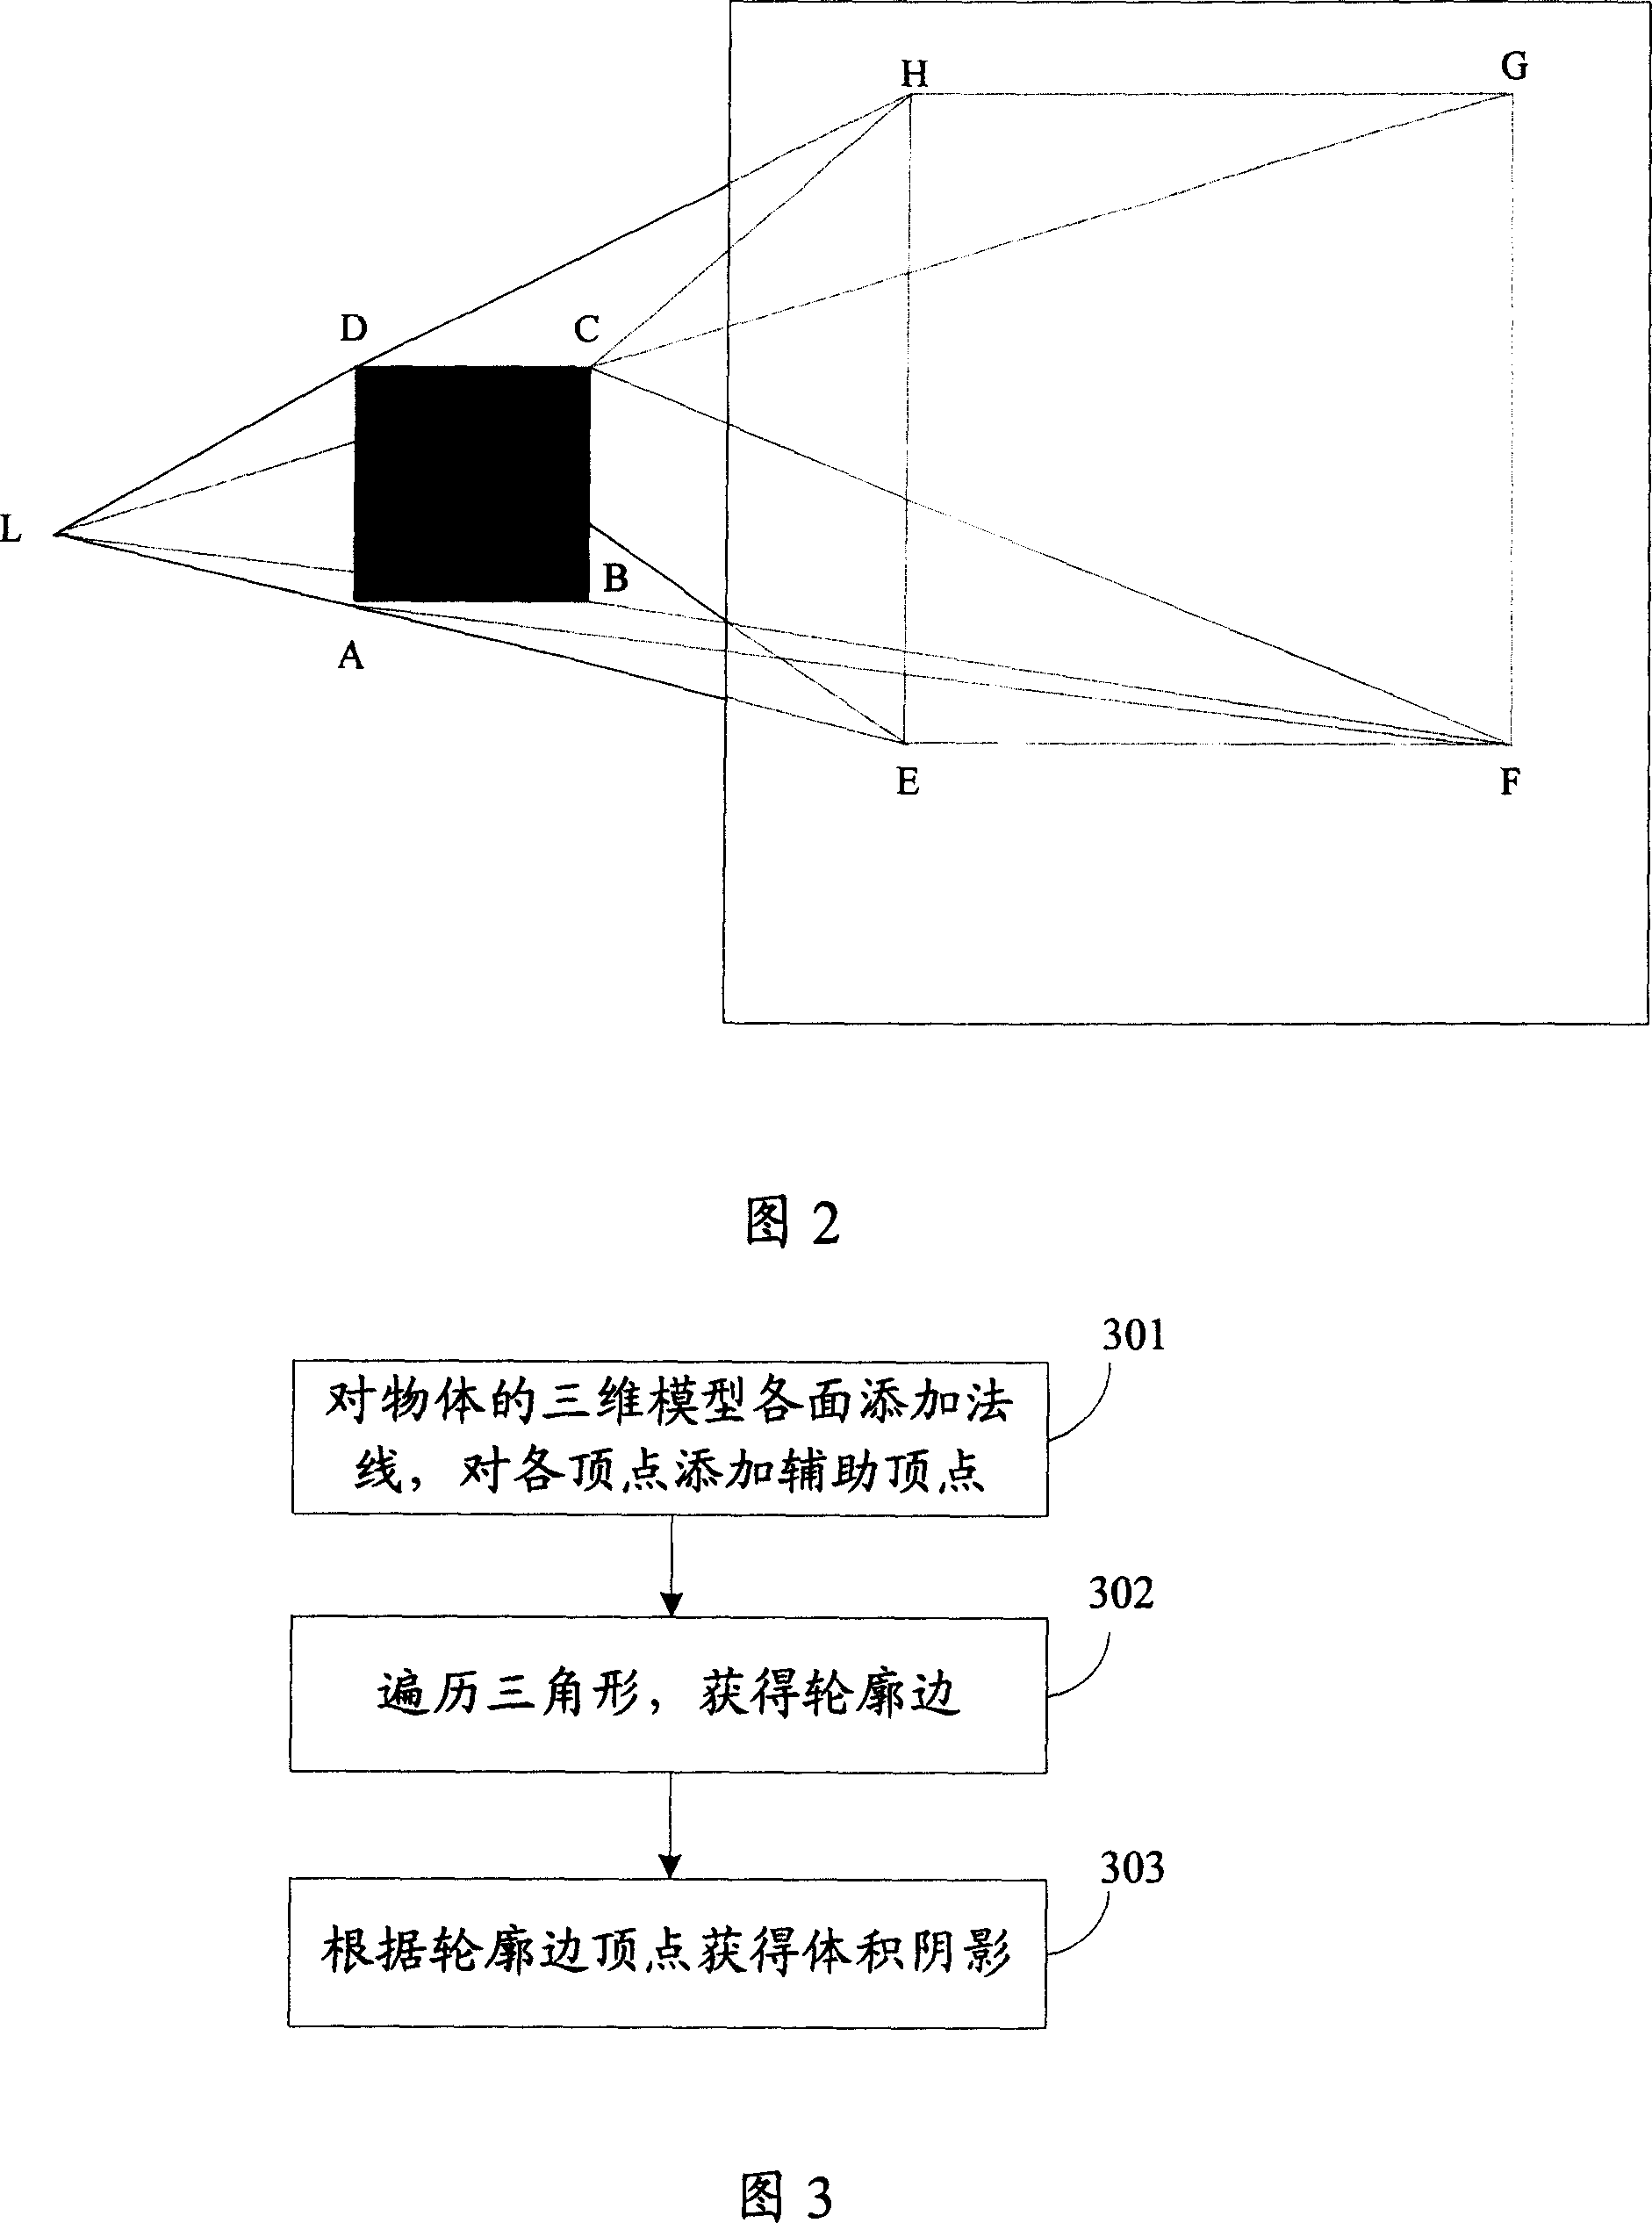 Method and system for producing volume shade